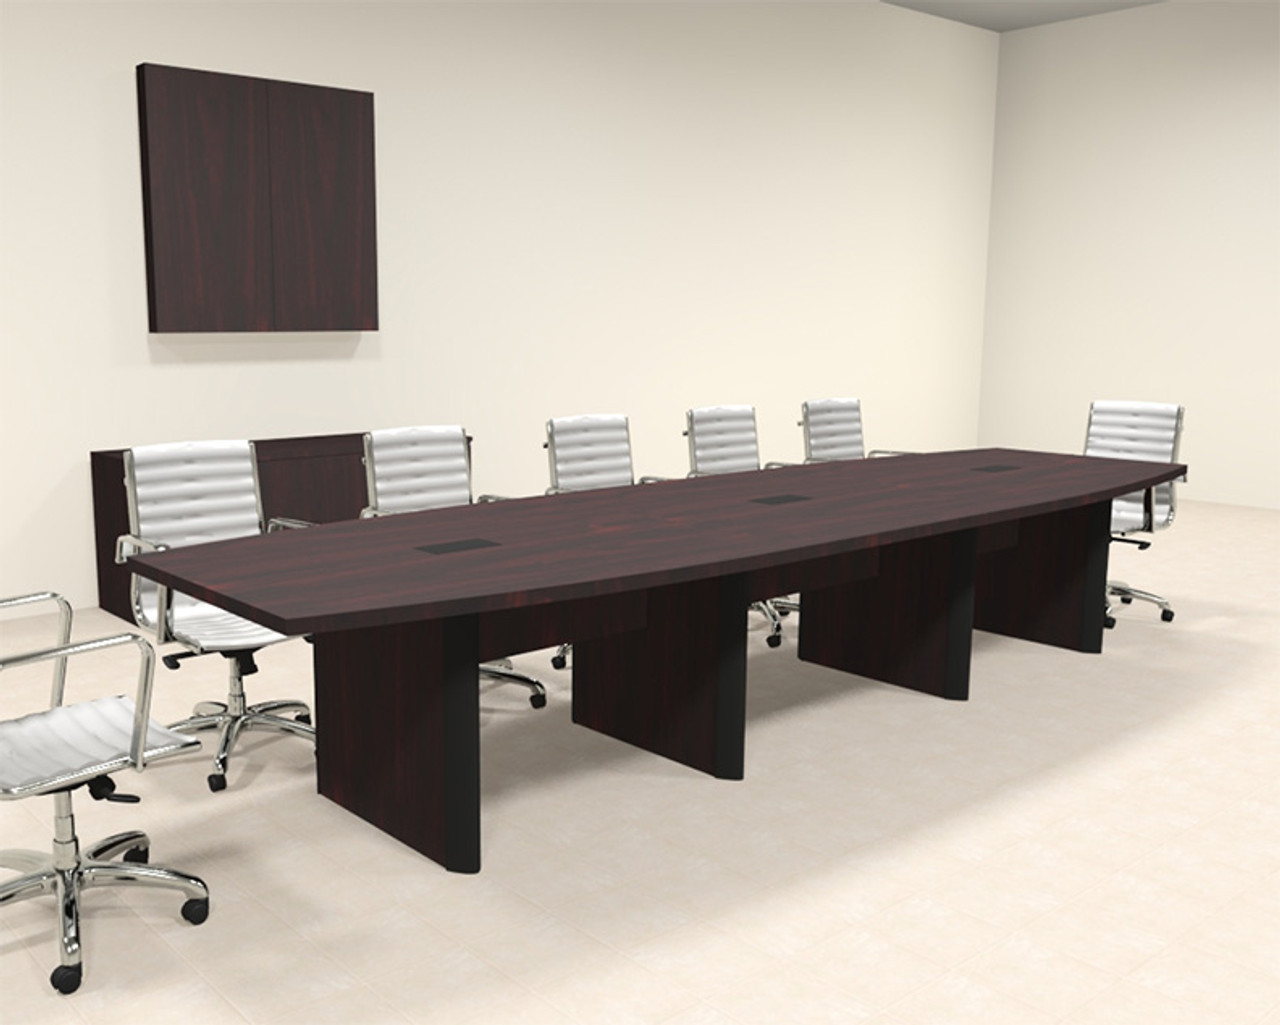 conference table boat shaped